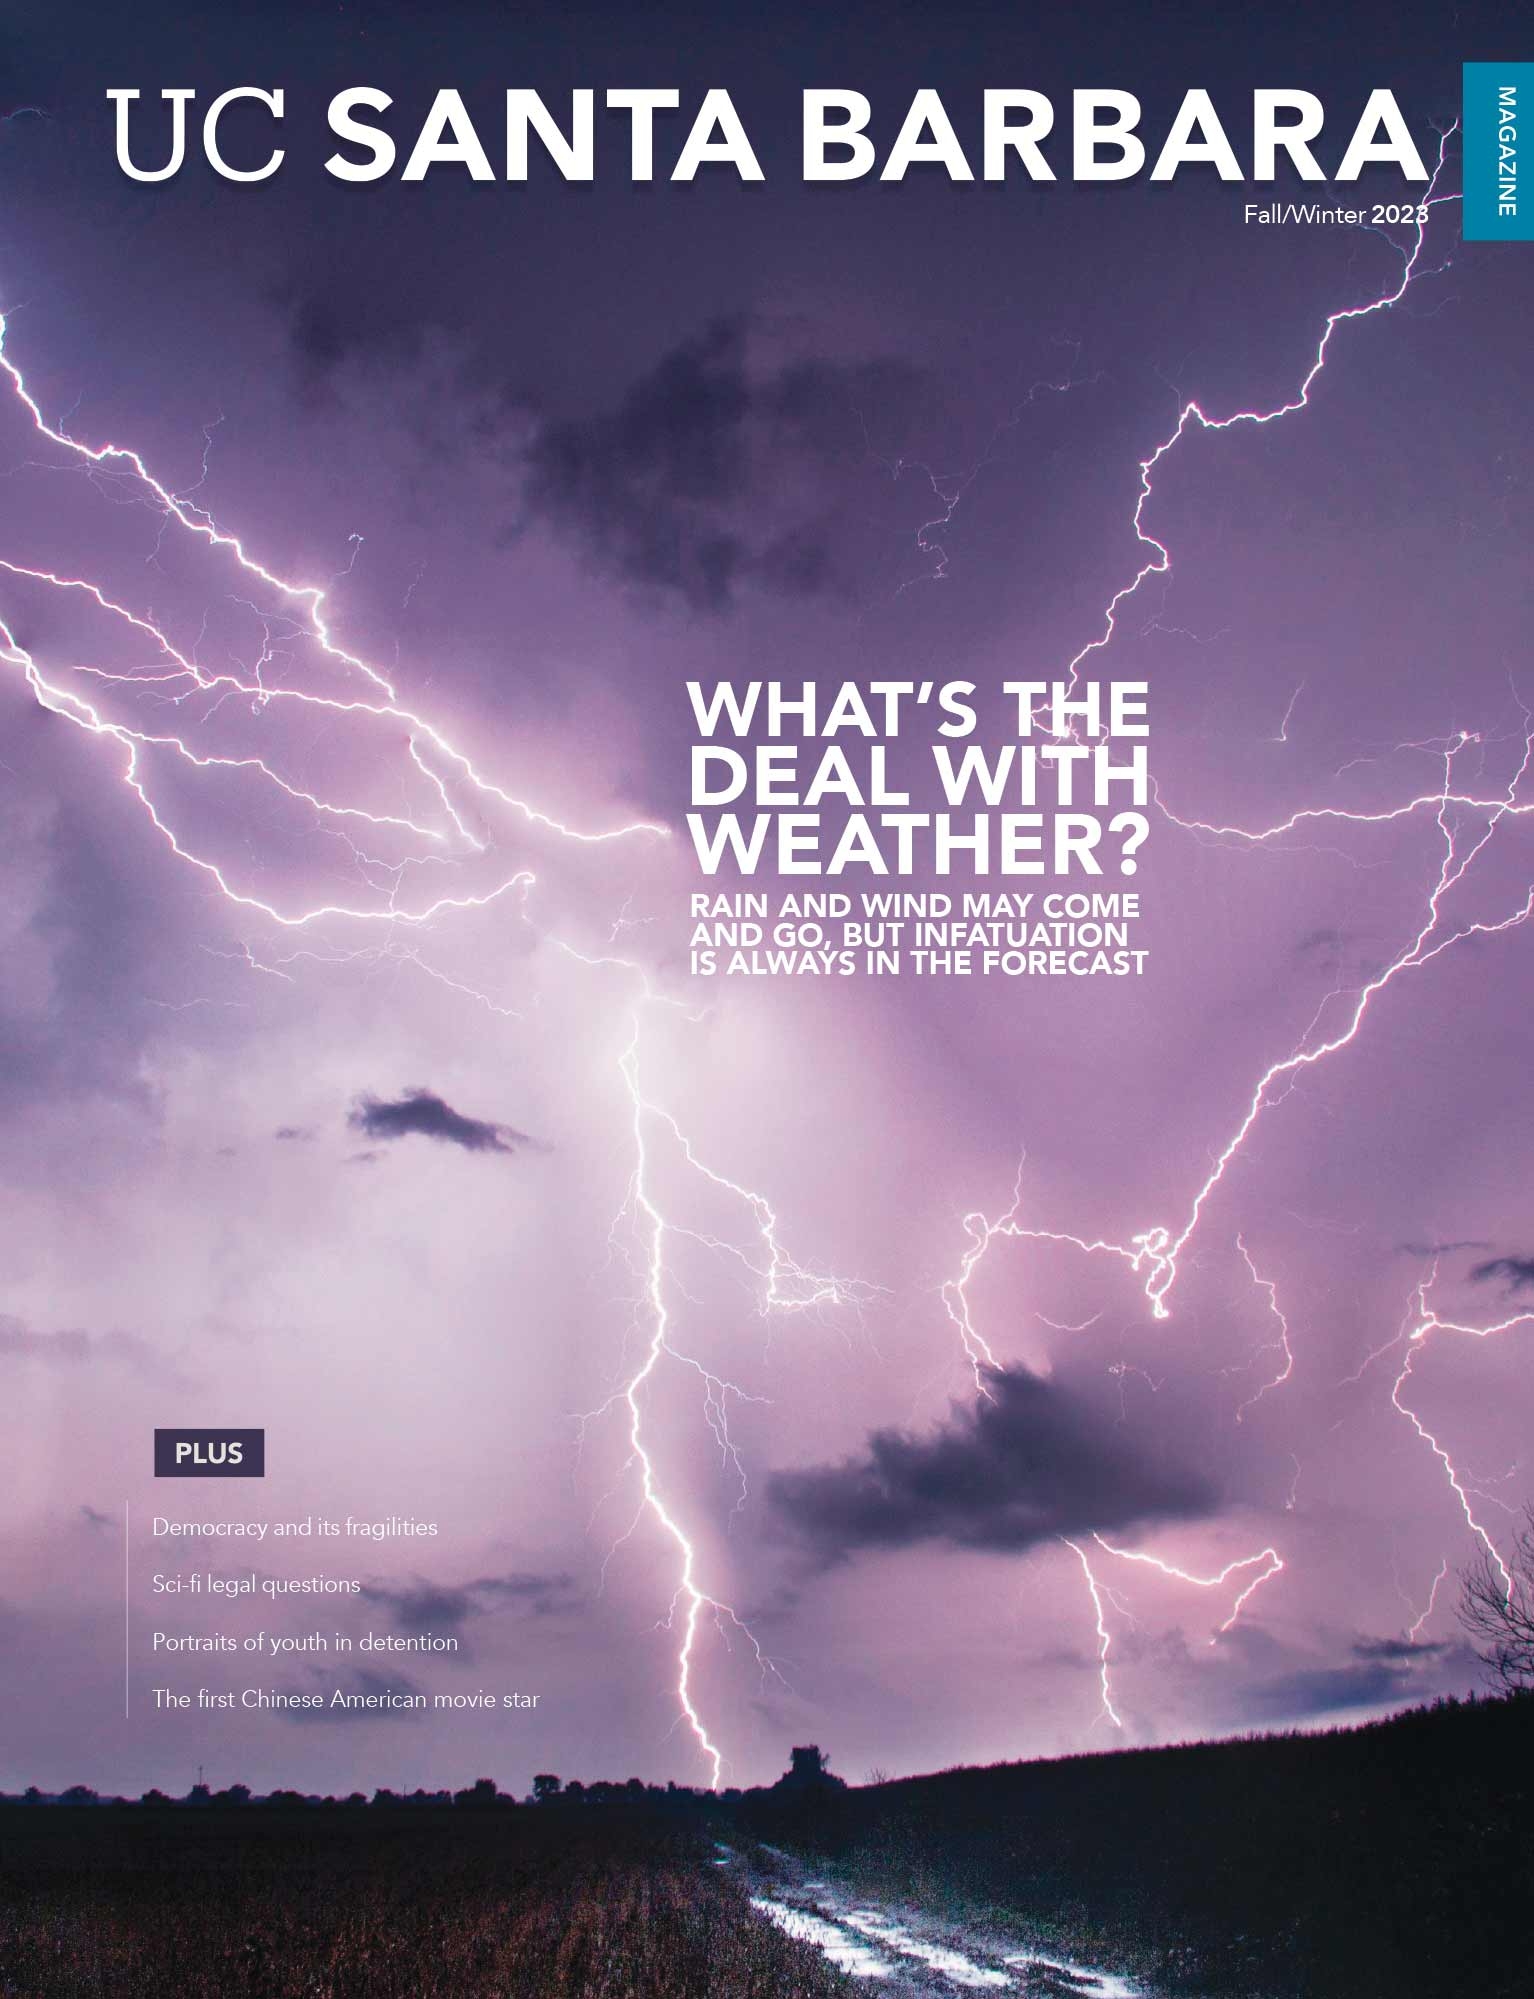 Fall/Winter 2023 Magazine cover with lightning striking 